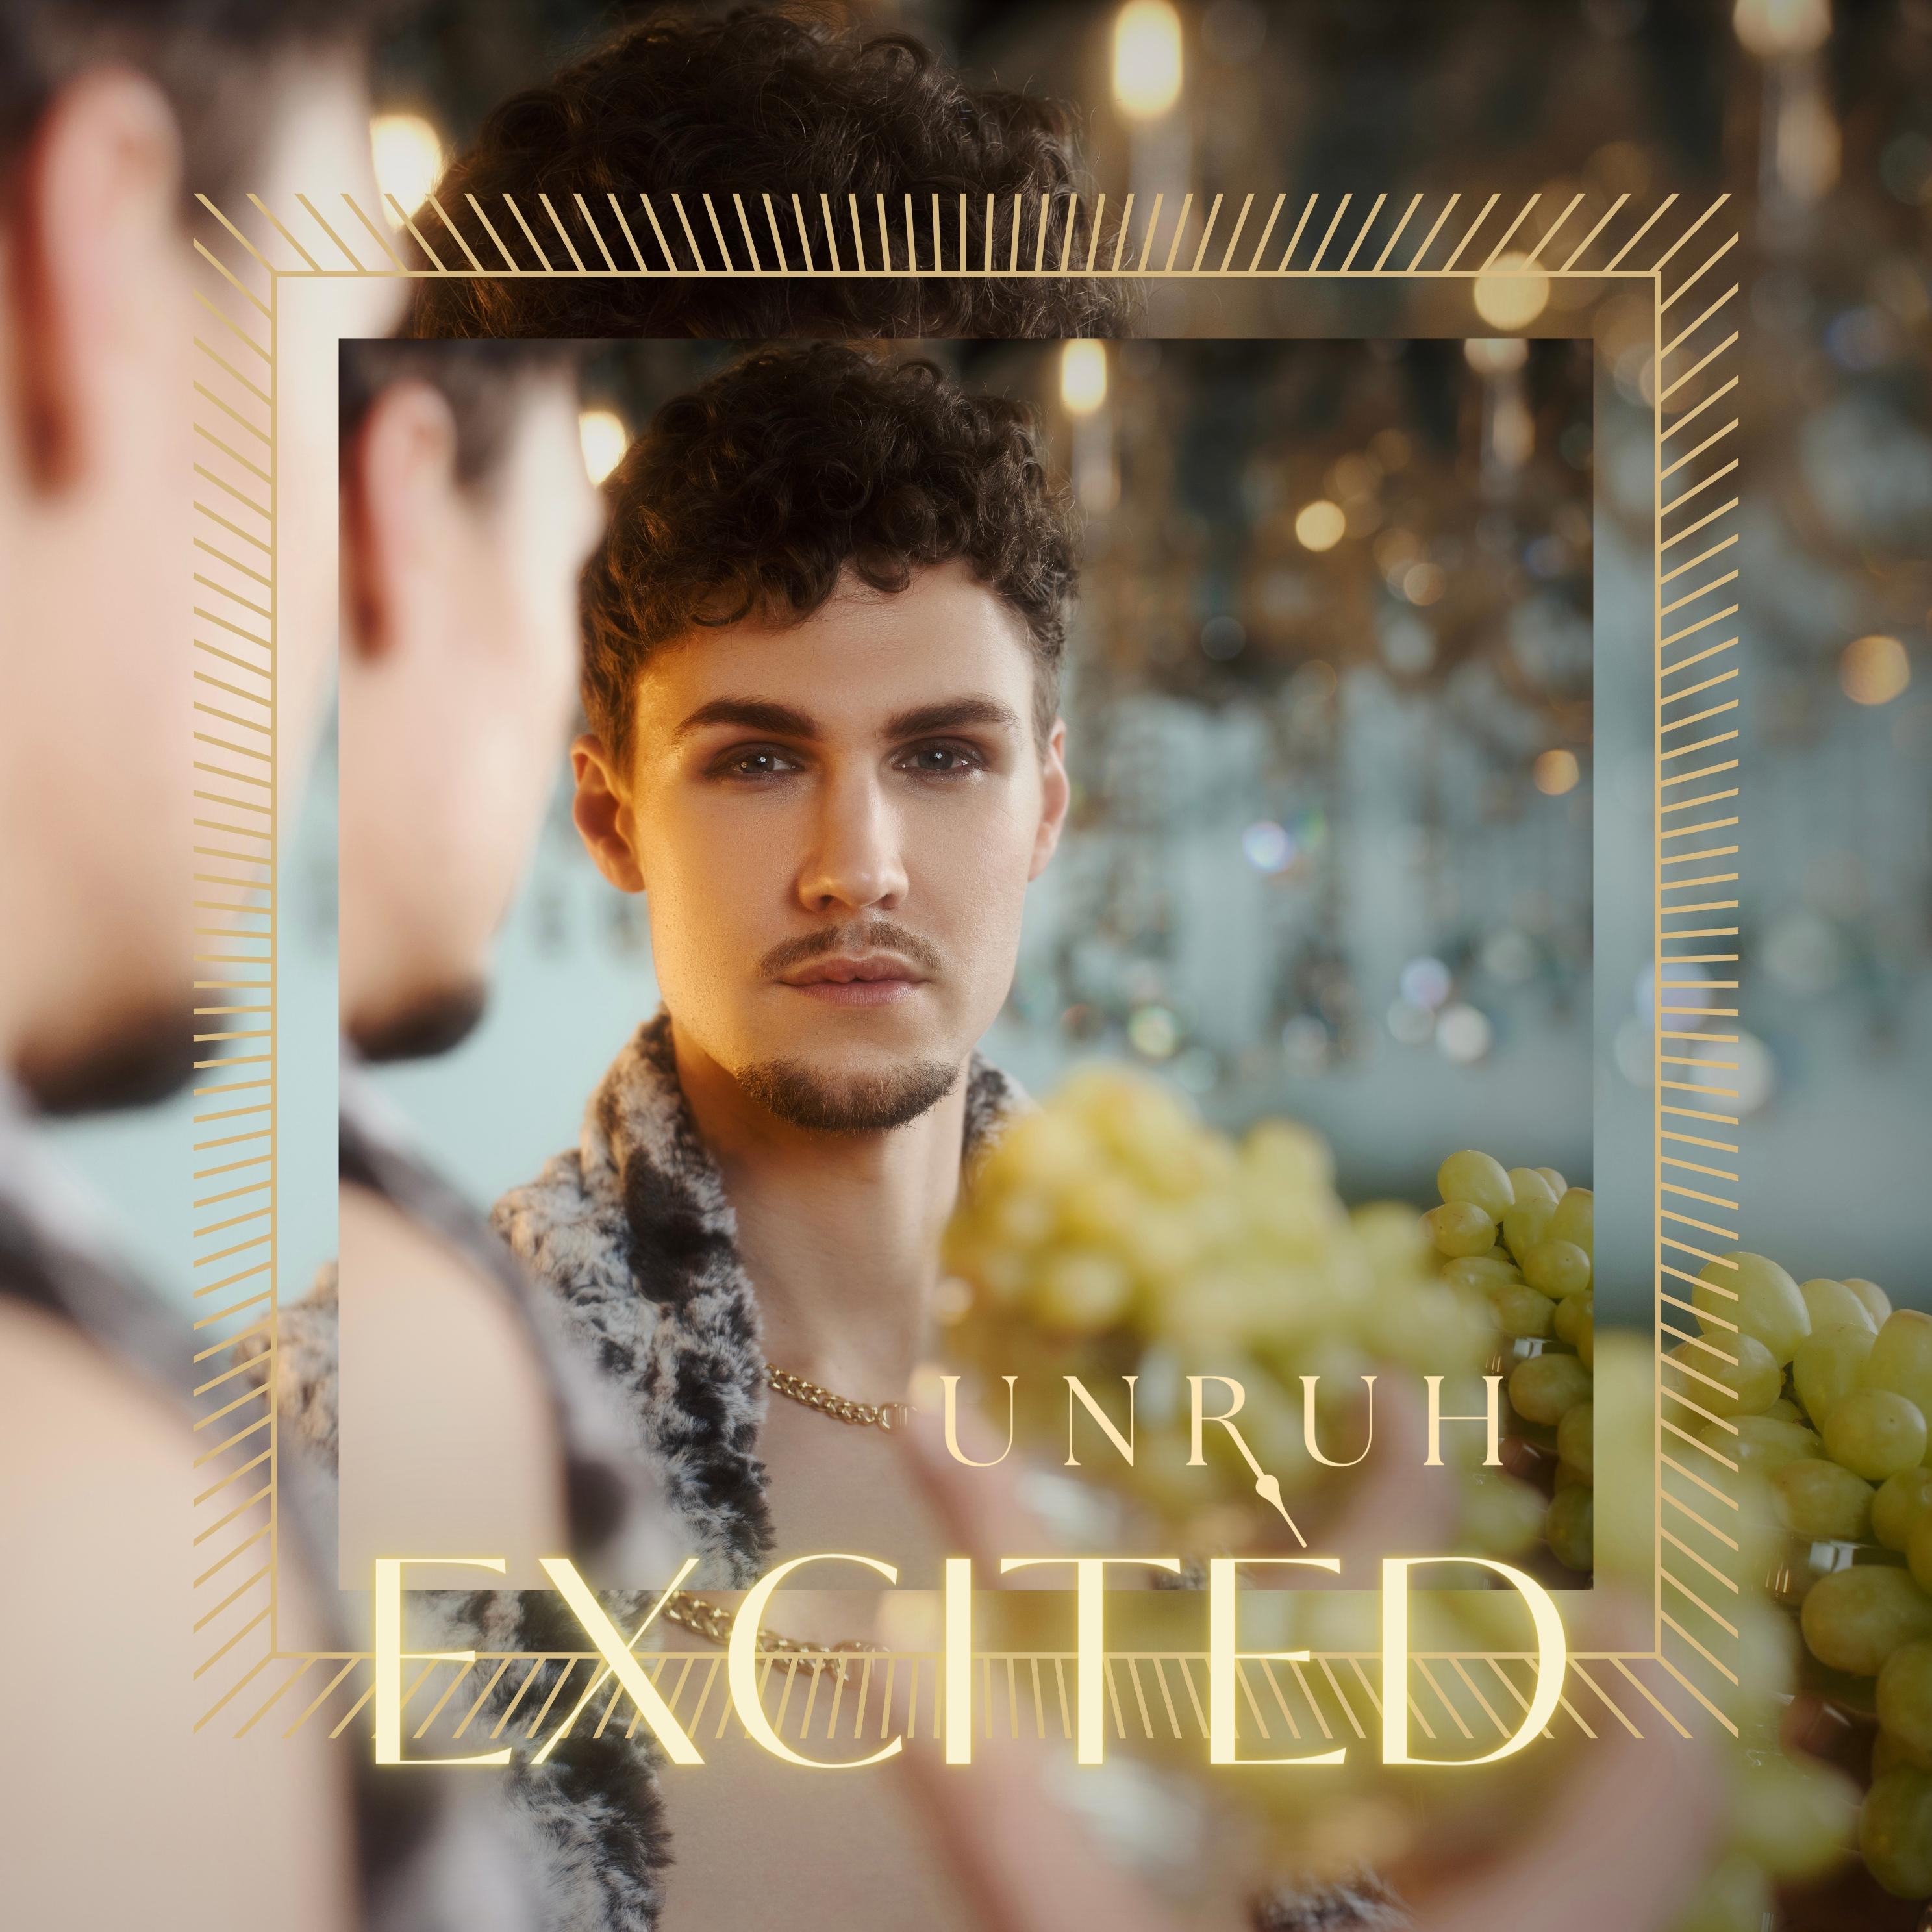 UNRUH – “Excited”